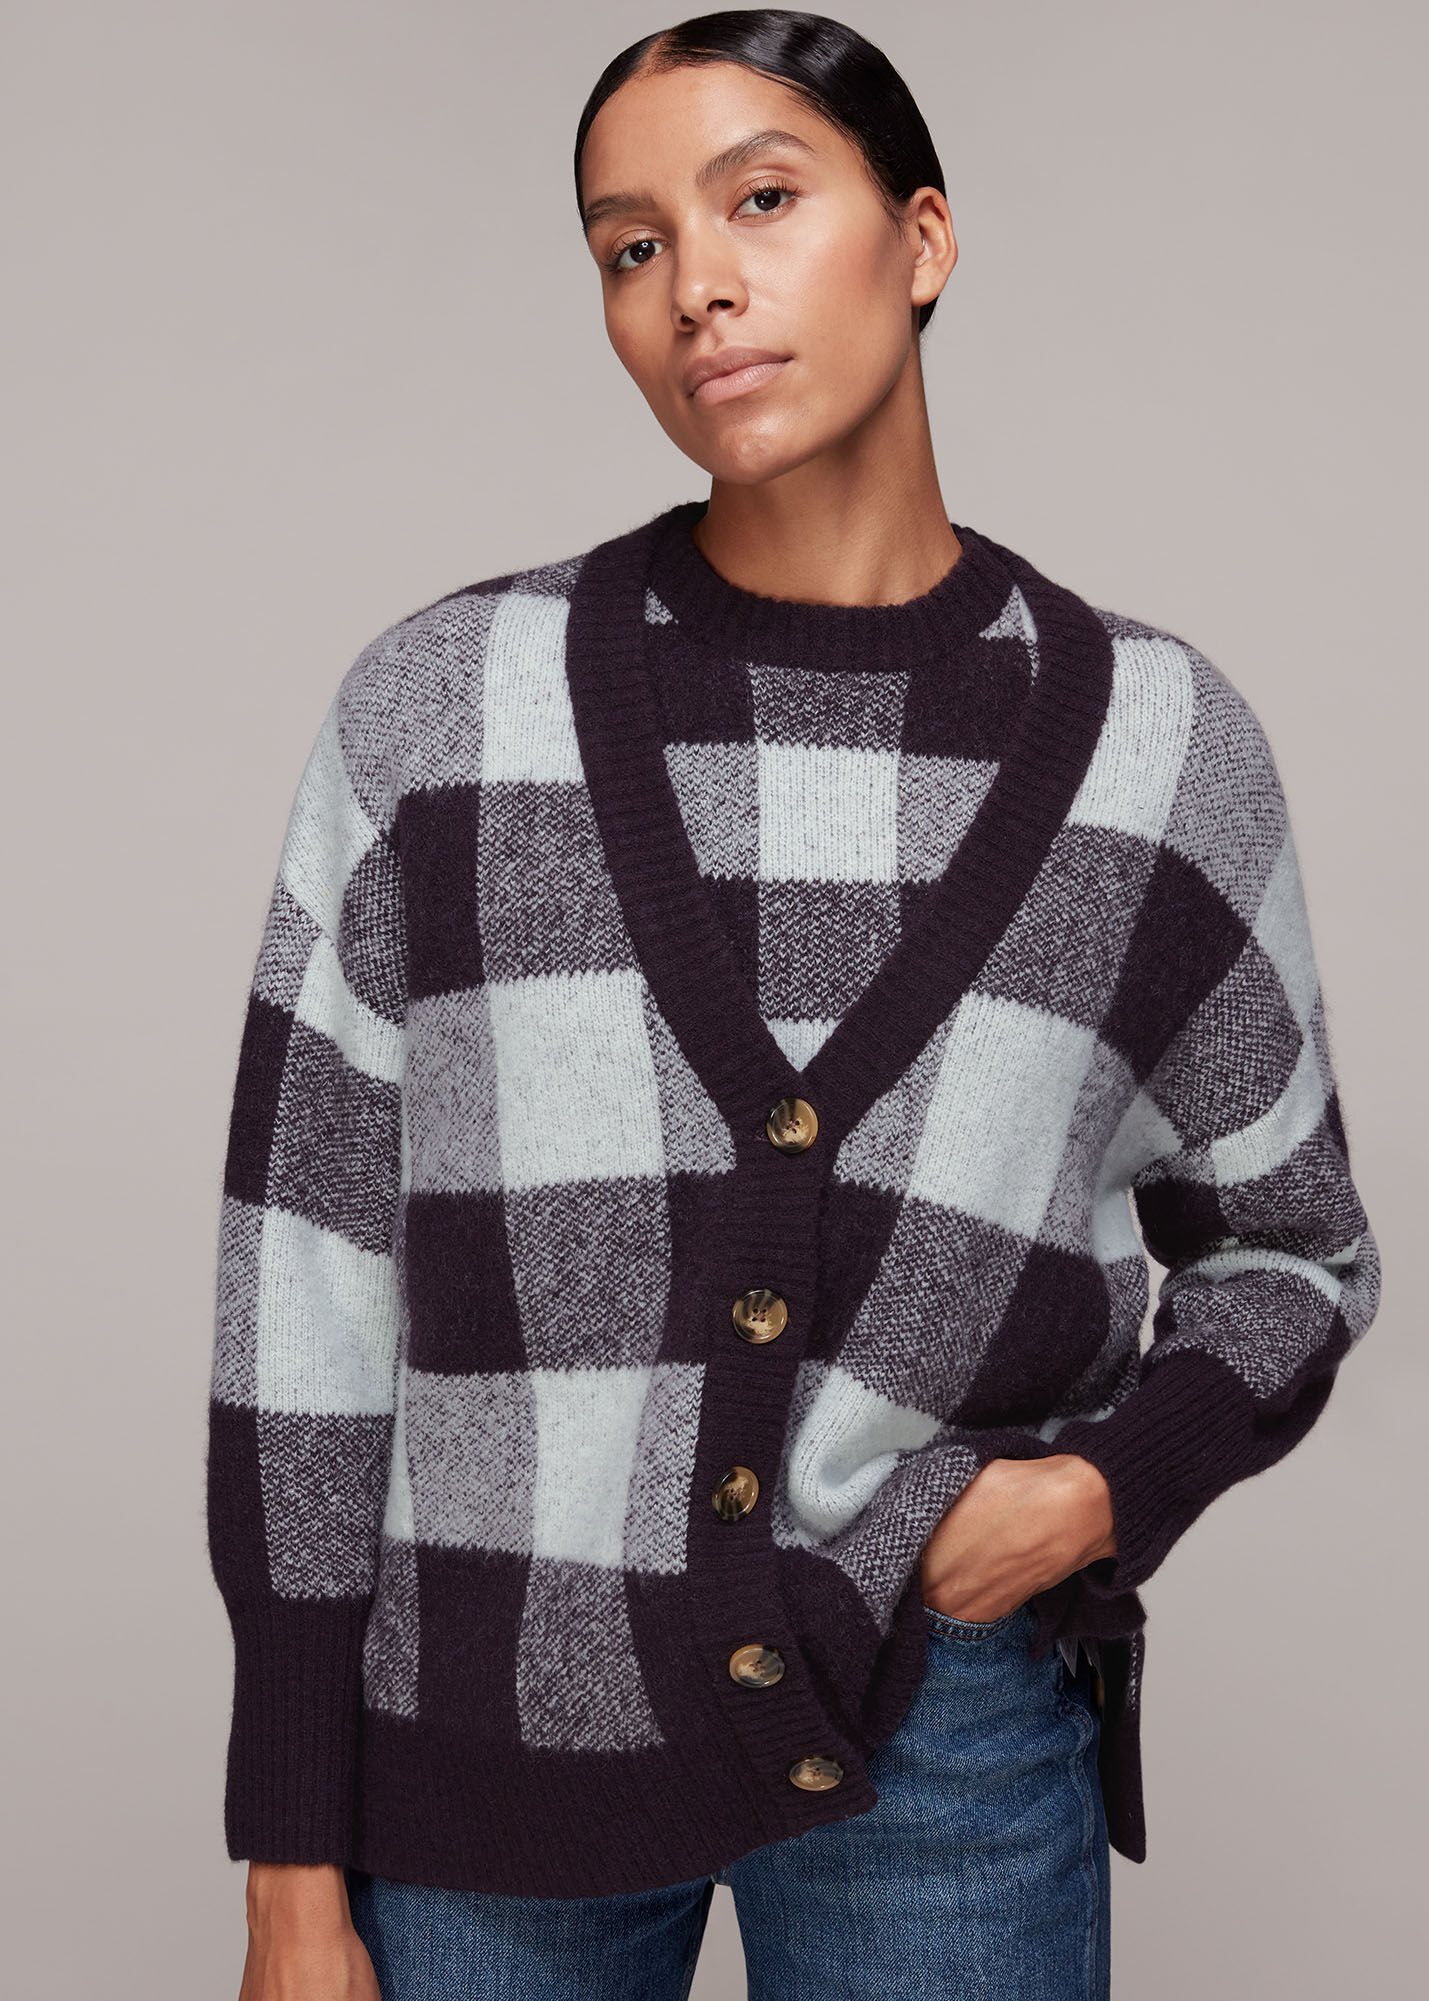 Multicolour Checked Cardigan | WHISTLES |